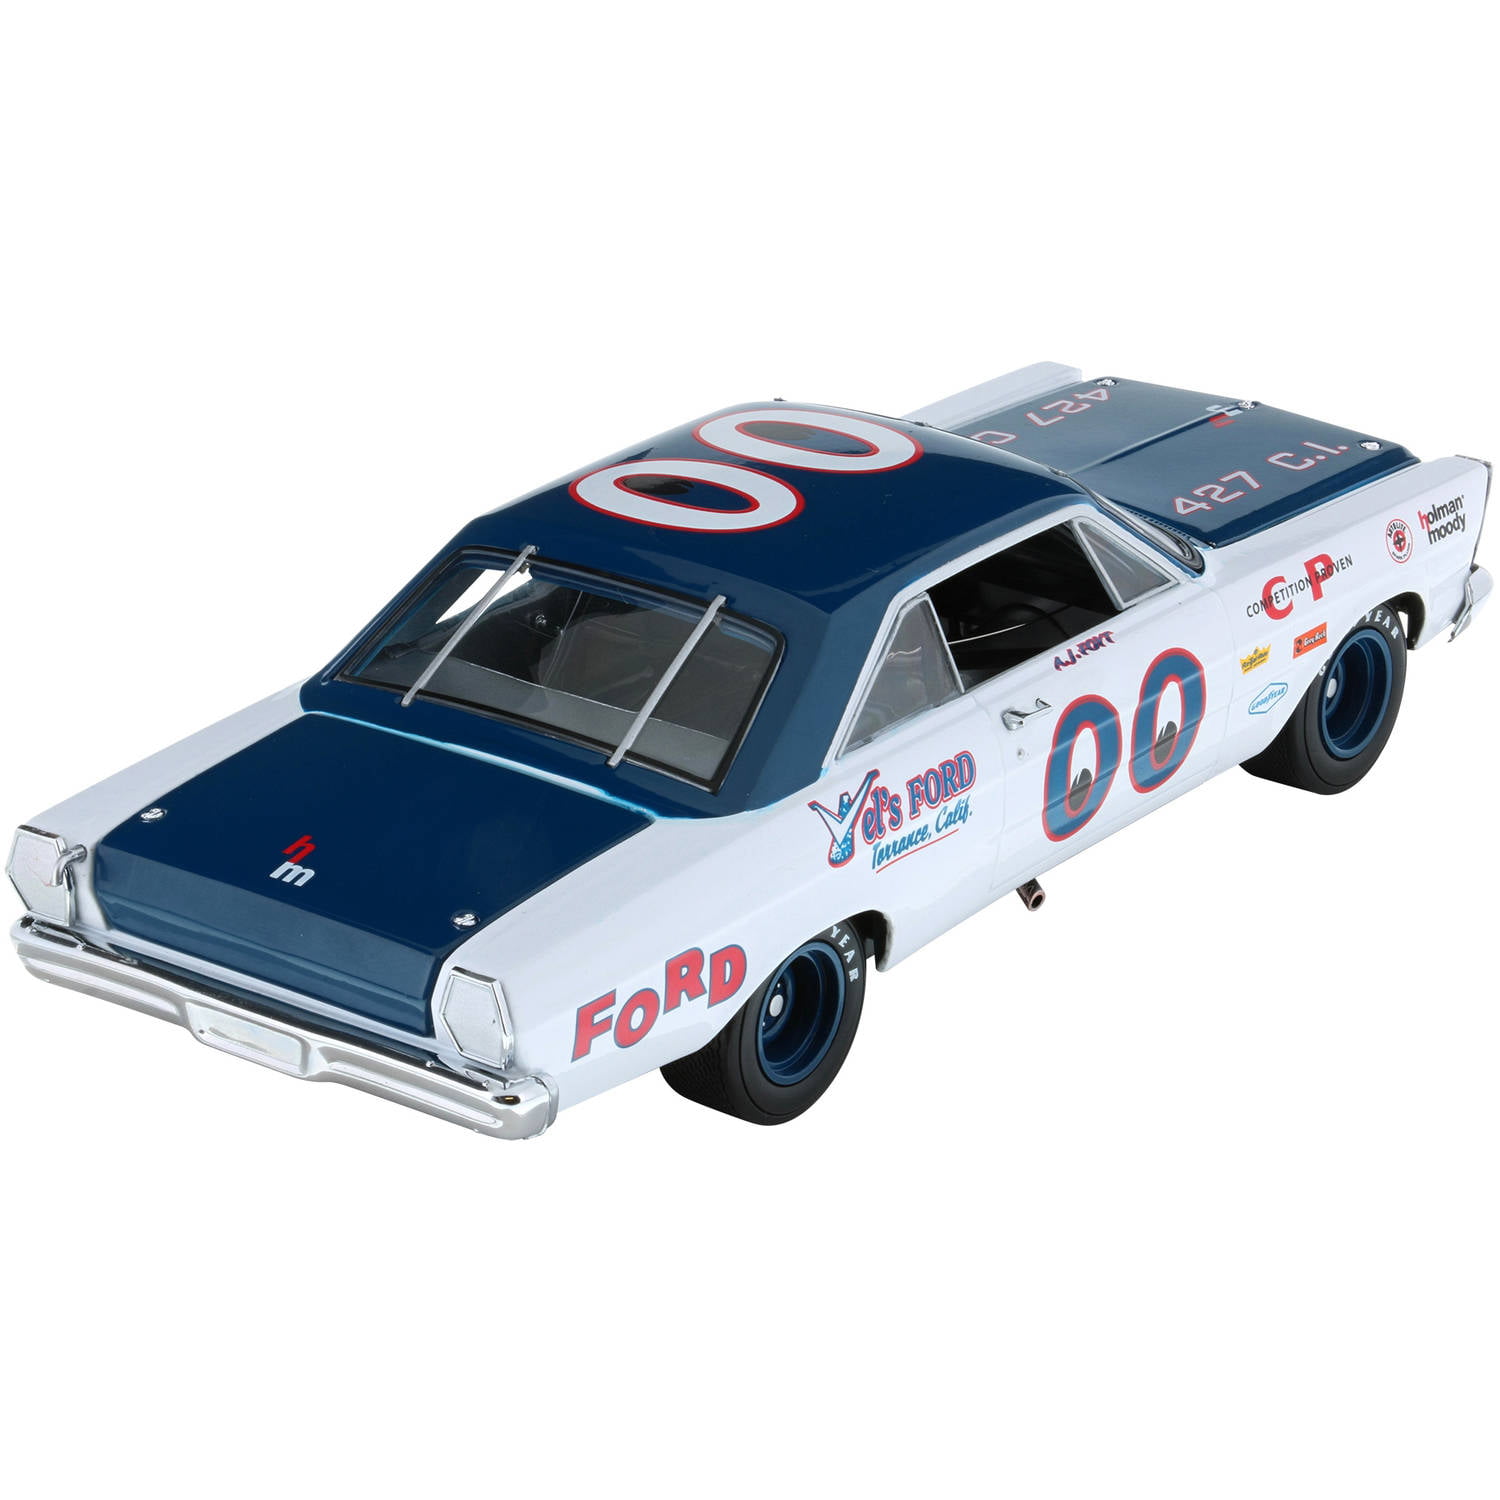 A.J Foyt 1965 Ford Galaxie 1:24 University of Racing Diecast 